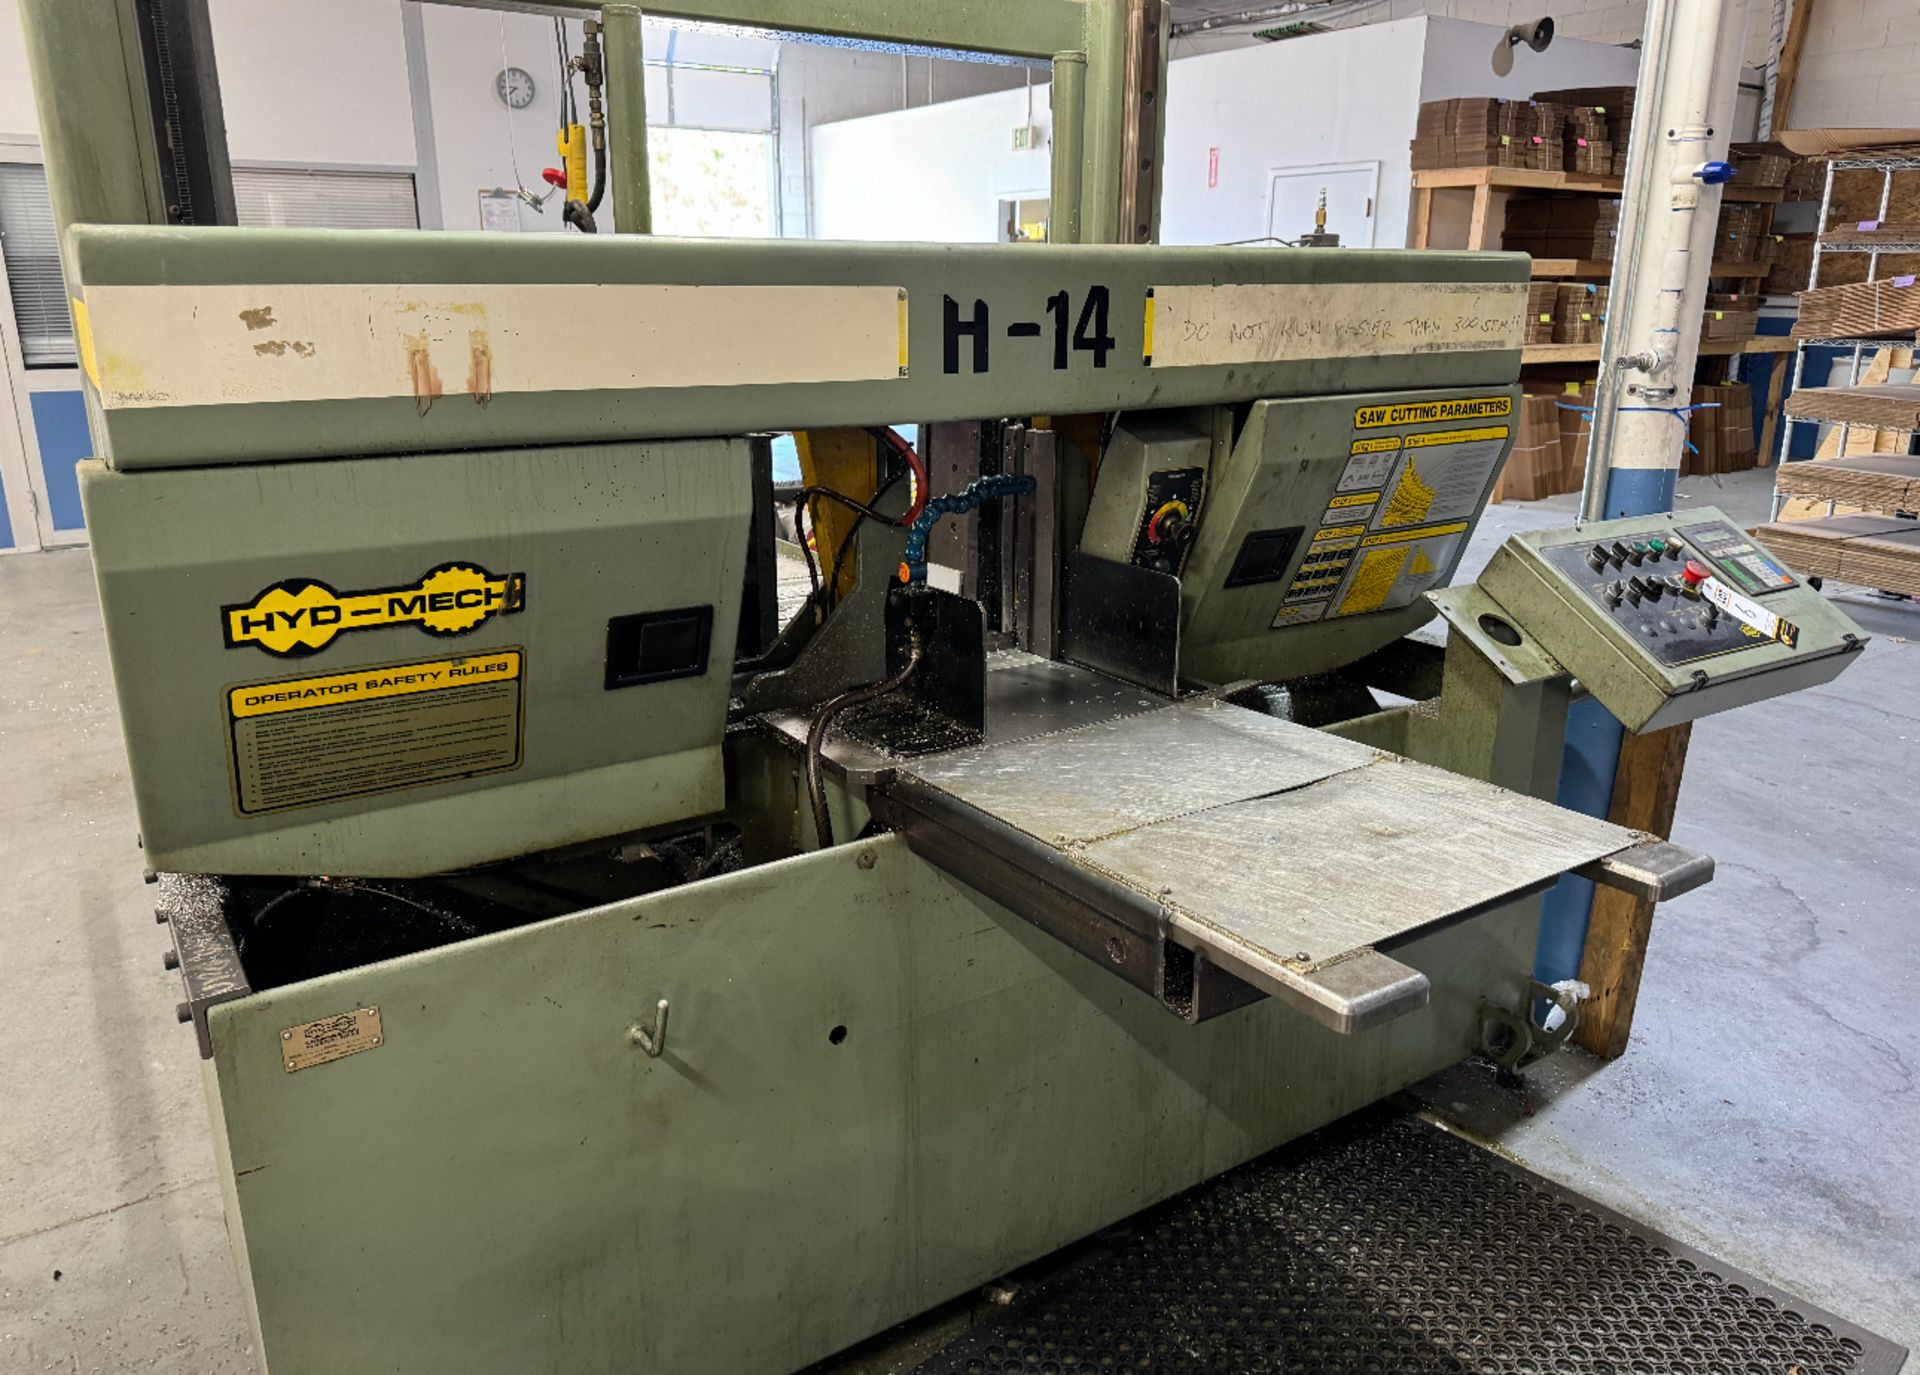 HYD-MECH Mdl. H-14 Automatic Horizontal Band Saw SN: 50500231 - Image 6 of 10